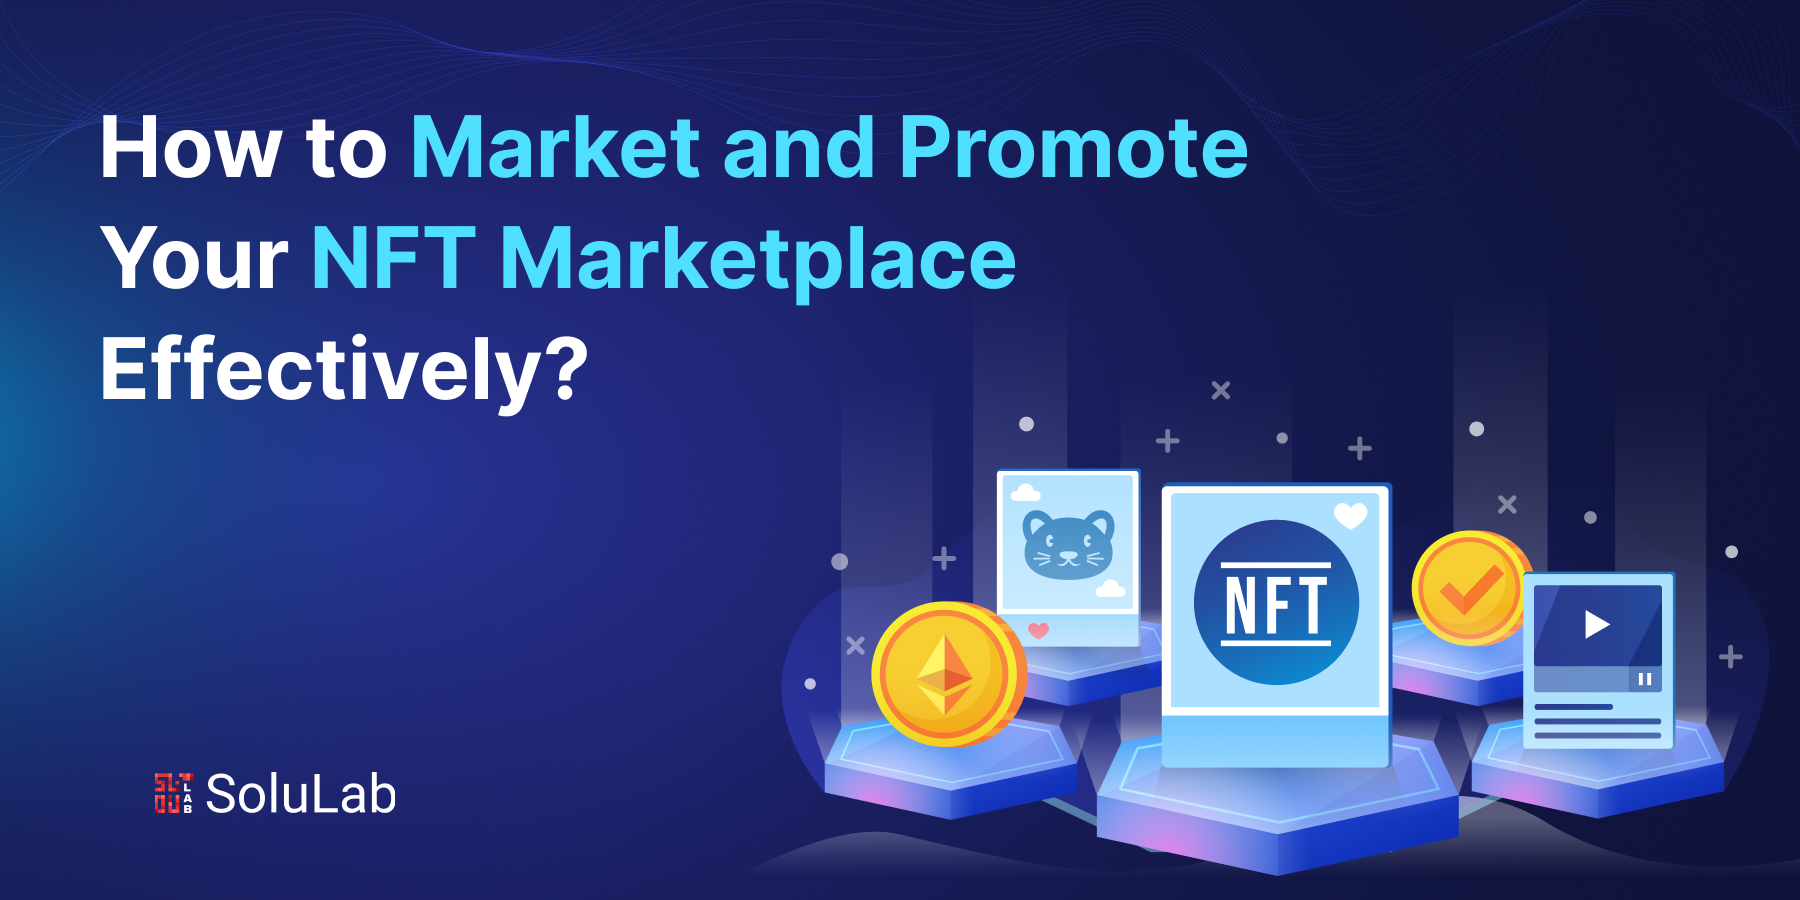 How to Market and Promote Your NFT Marketplace Effectively?